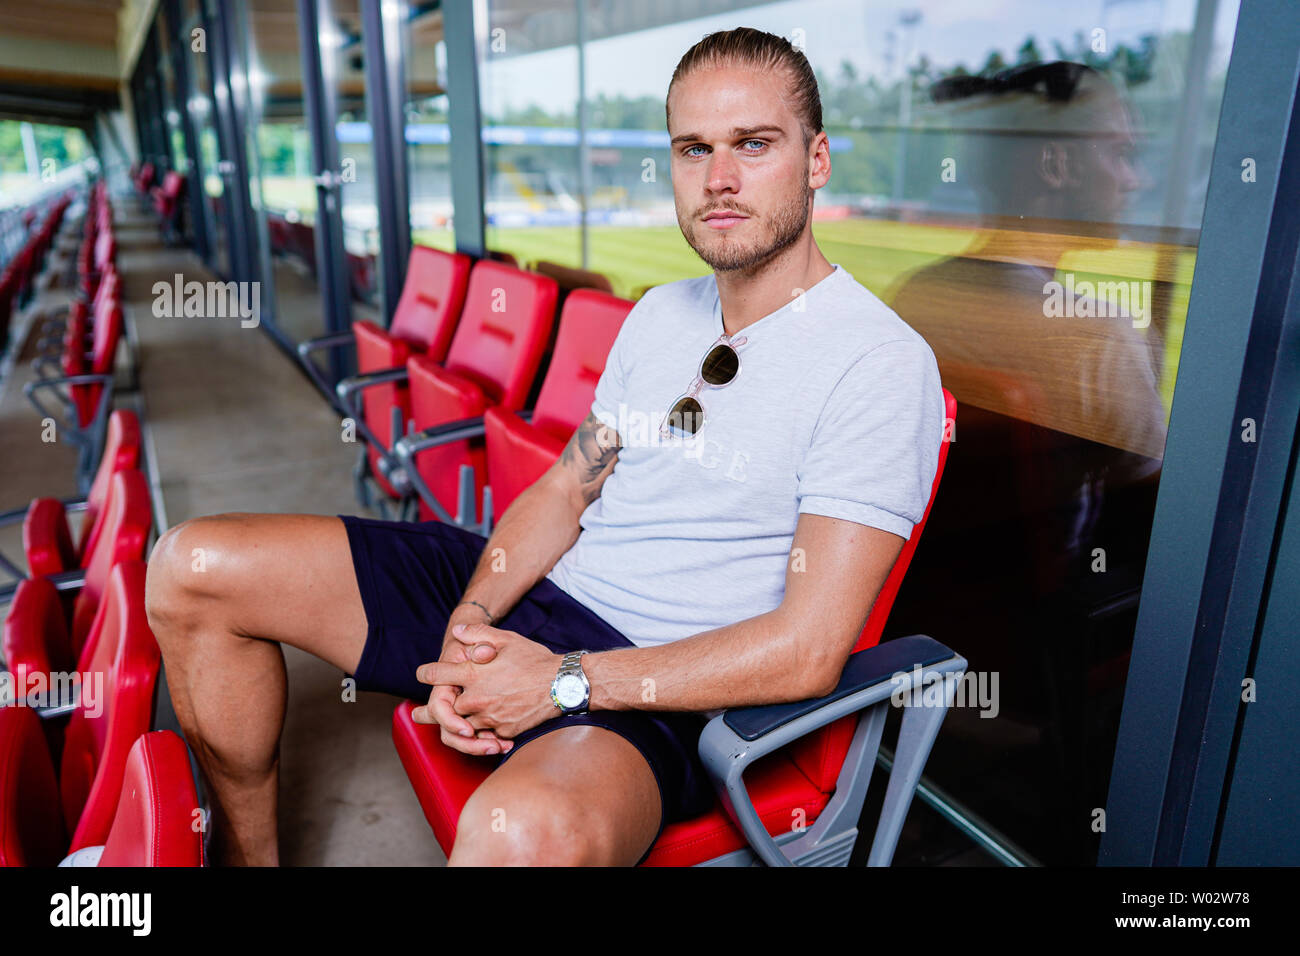 Sandhausen, Germany. 25th June, 2019. Rurik Gislason, player of the second division football team SV Sandhausen, sits on the stadium grandstand. Gislason from SV Sandhausen became world famous a year ago. Not because he delivered sensational performances for Iceland at the World Cup in Russia, but because of his appearance. (to dpa 'One year after the hype: The new life of the 'beautiful' Rurik Gislason') Credit: Uwe Anspach/dpa/Alamy Live News Stock Photo